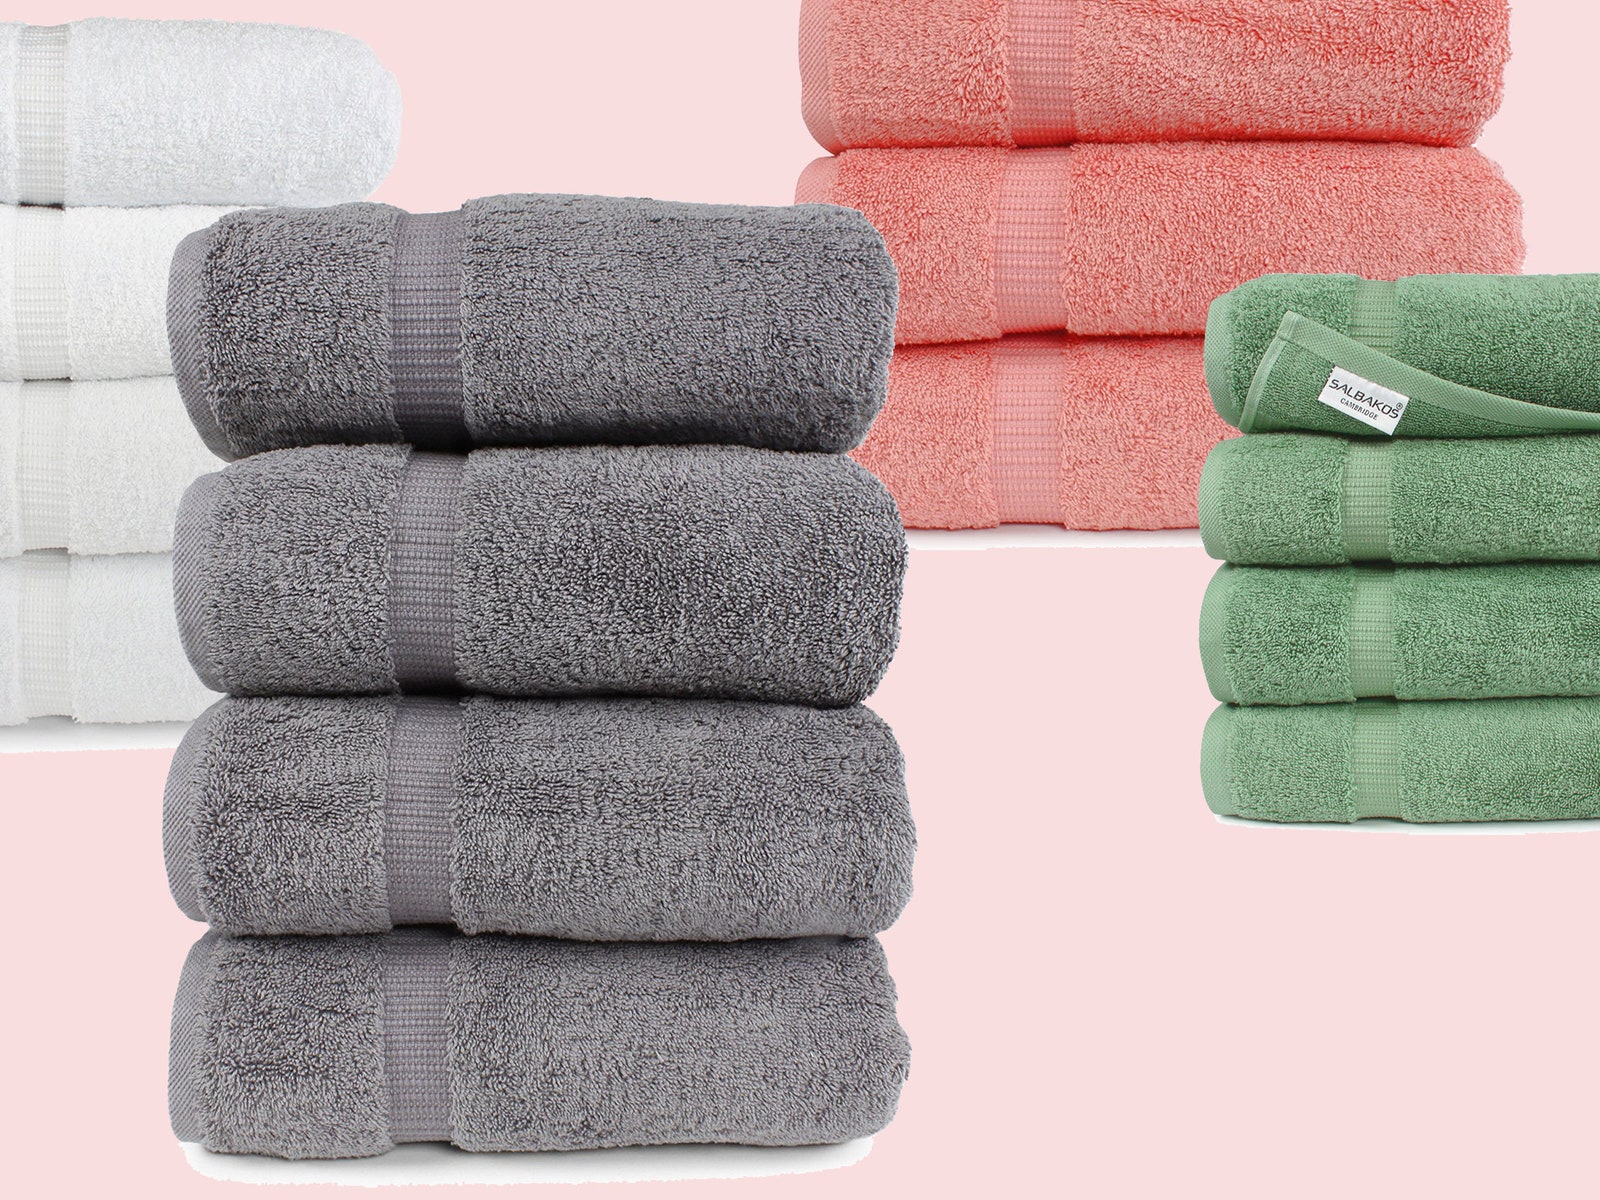 11 Best Bath Towels on Amazon, According to More Than 16,000 Reviewers